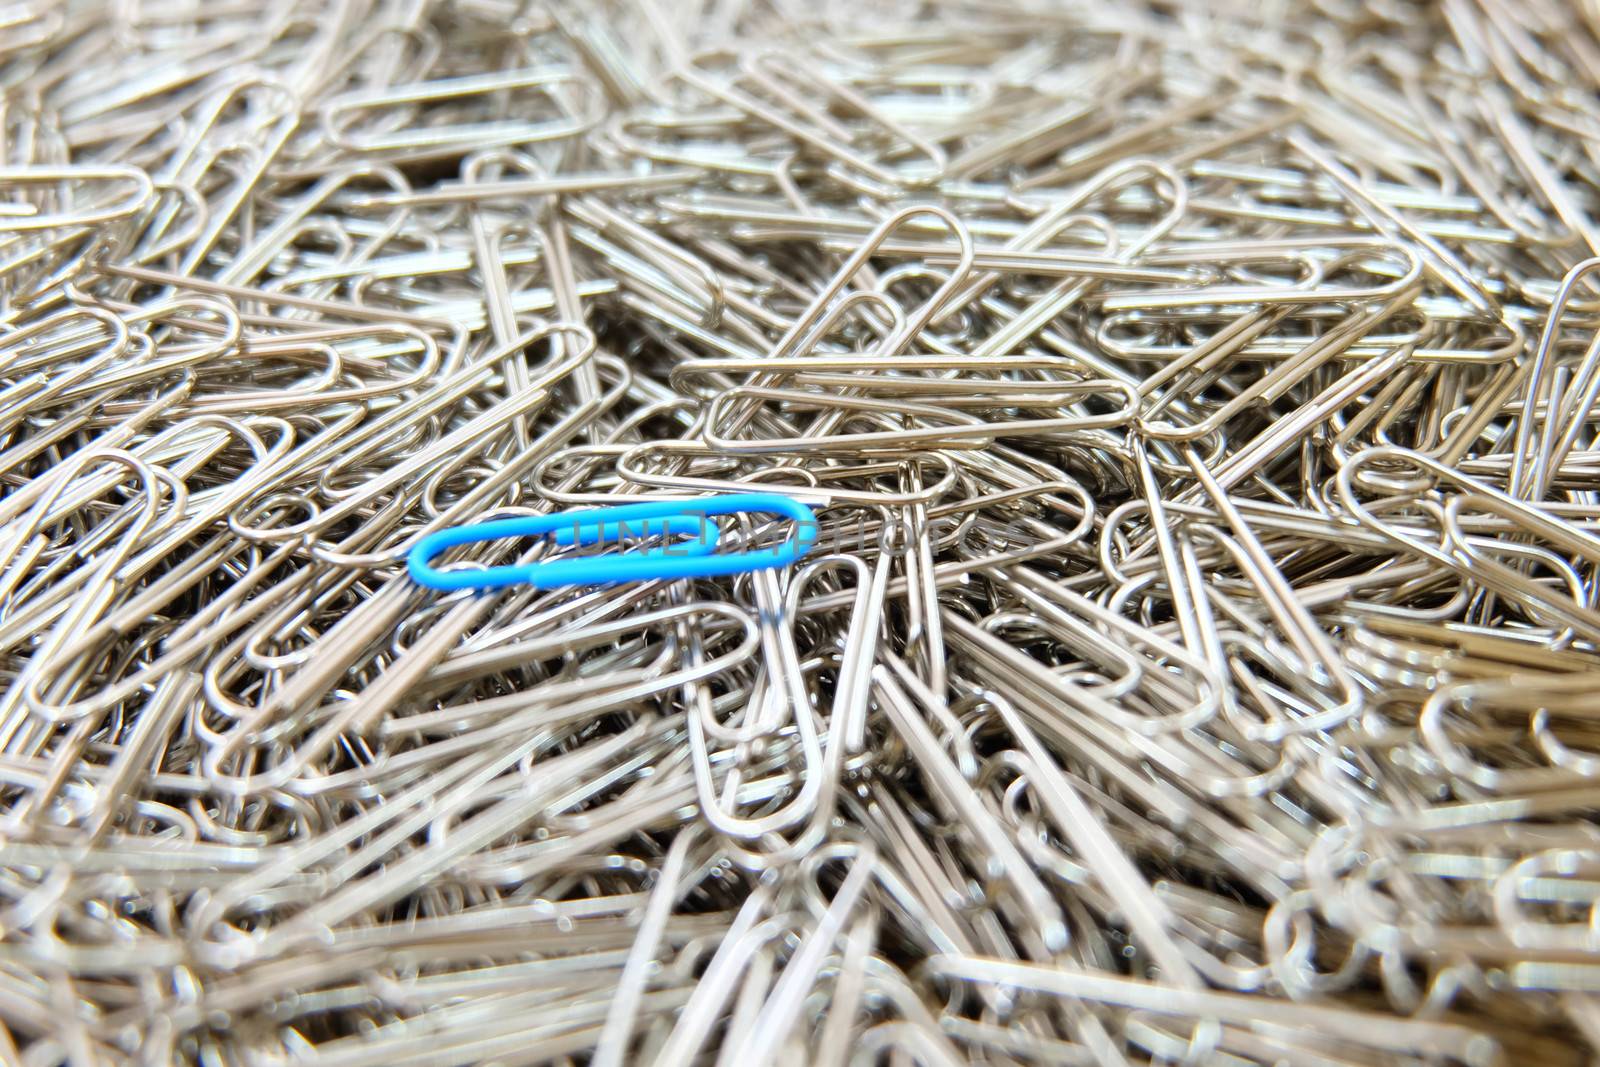 Blue paper clip on paper clips background. by e22xua